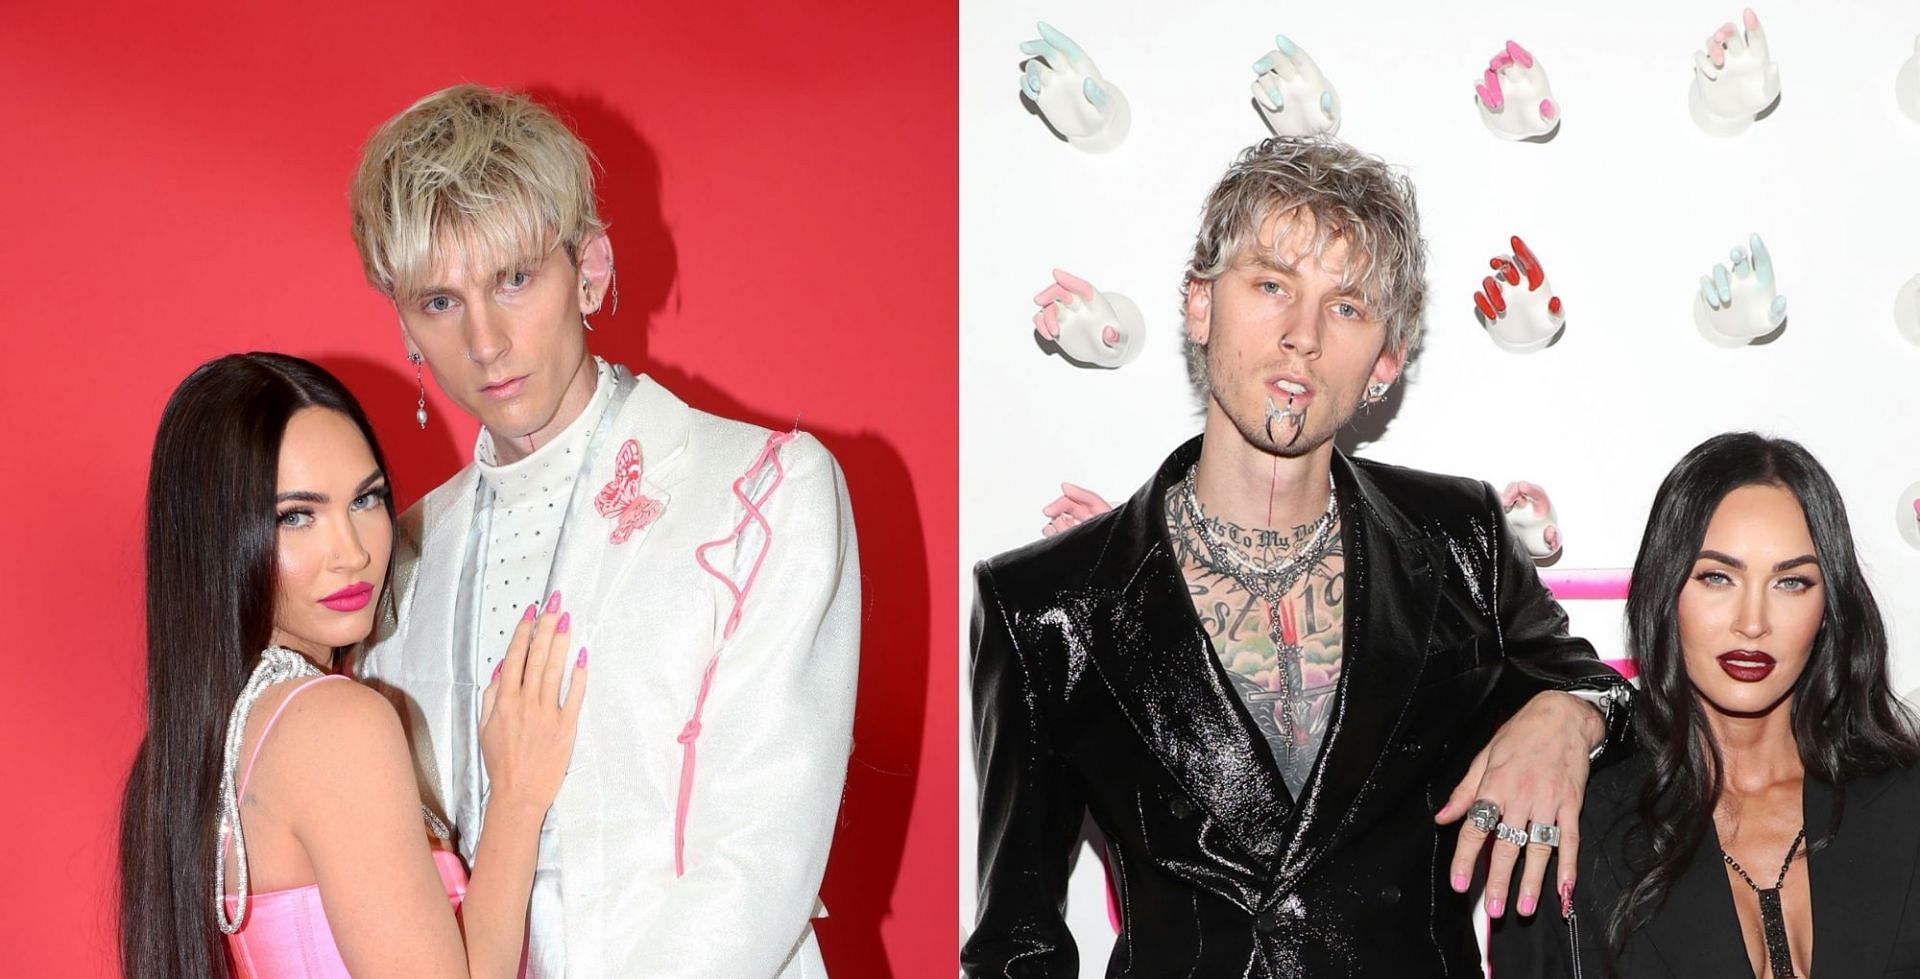 Machine Gun Kelly and Megan Fox got engaged on January 11 (Image via Getty Images)